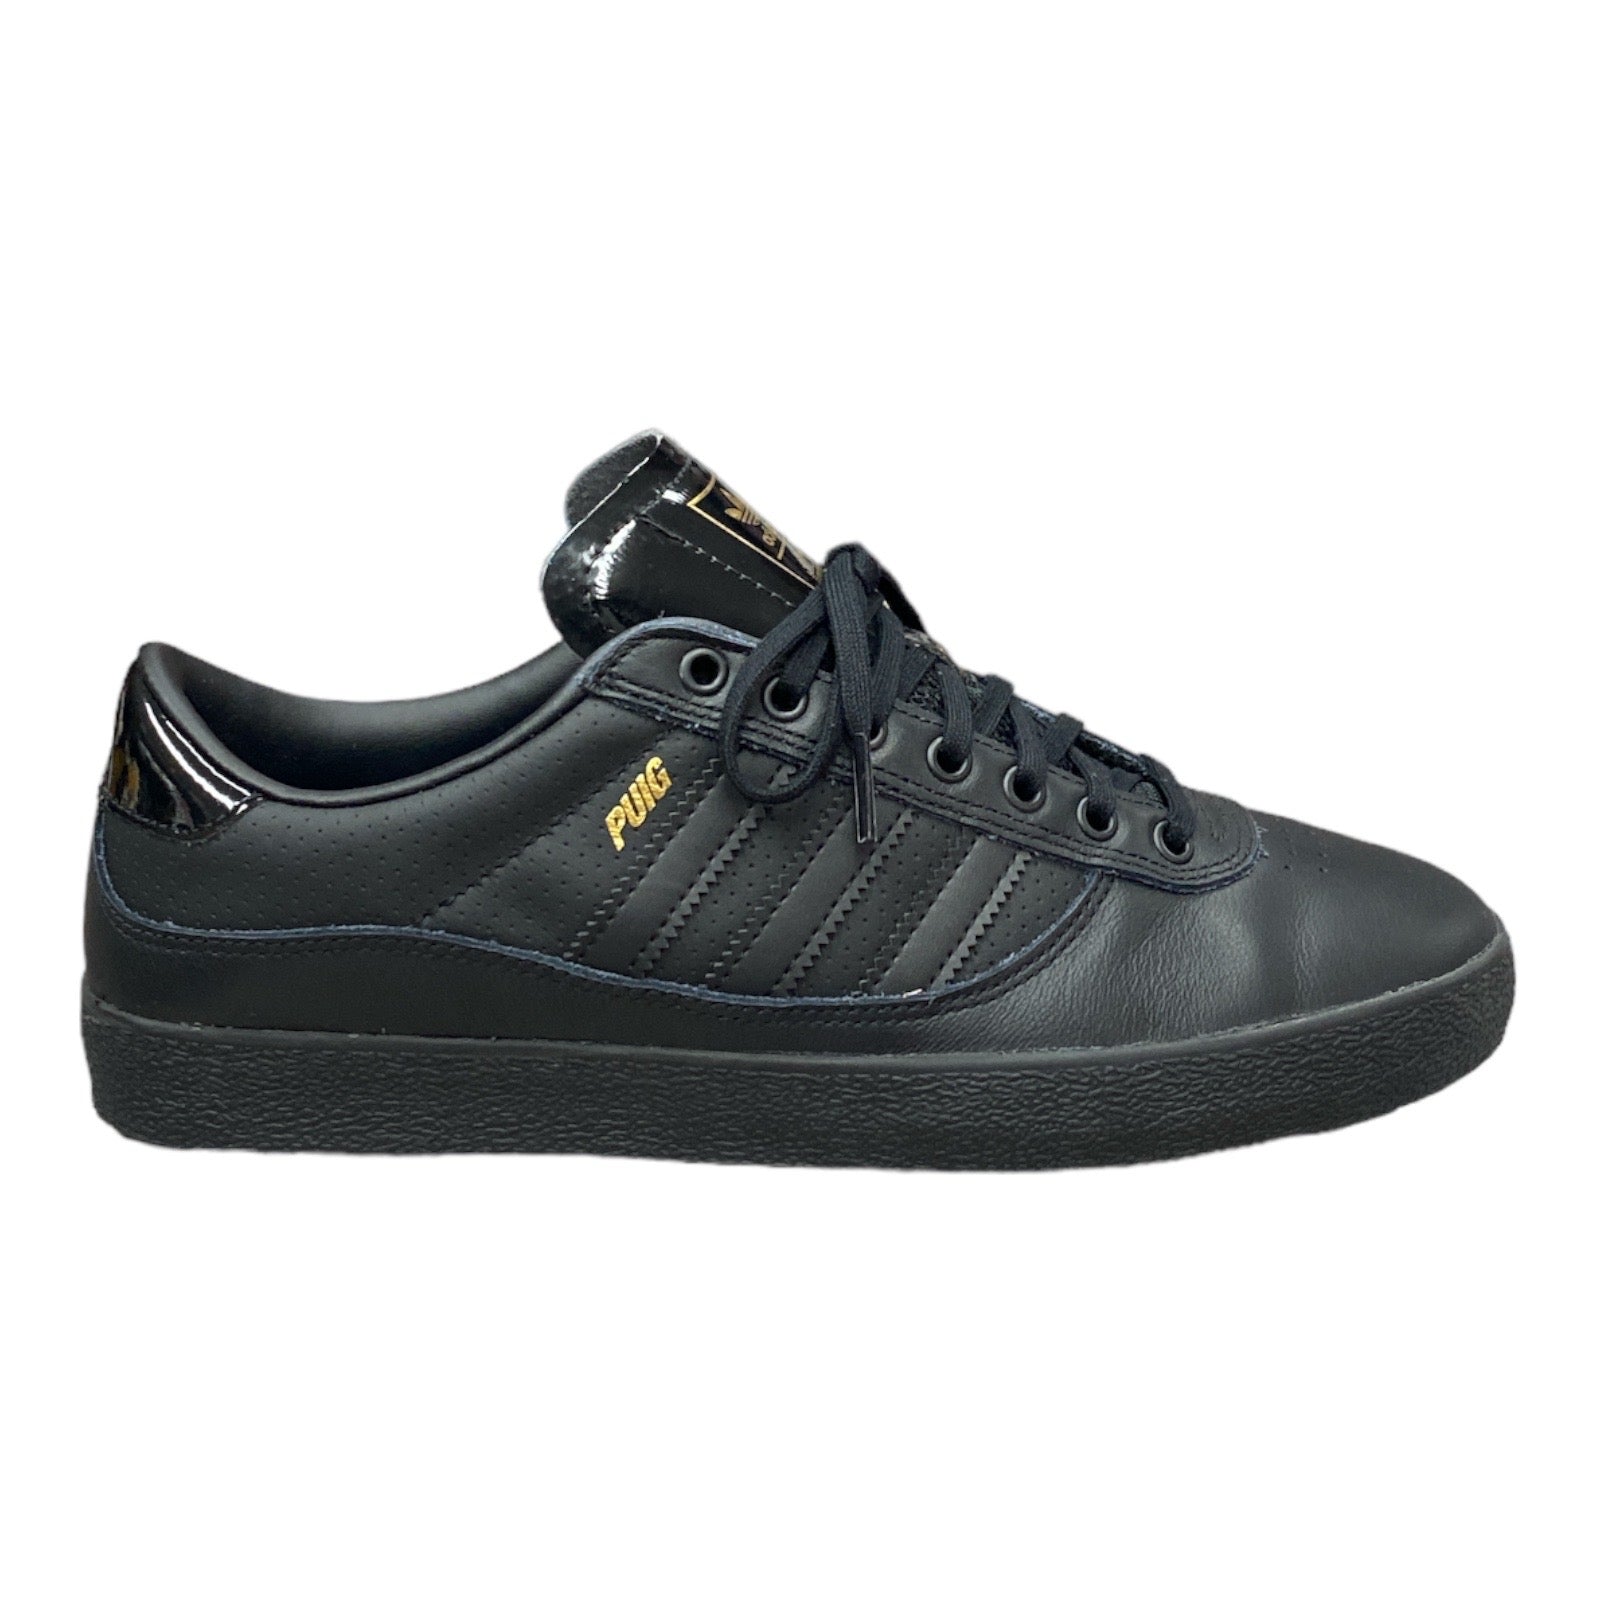 Adidas Puig Indoor Skate Shoe in all black leather.